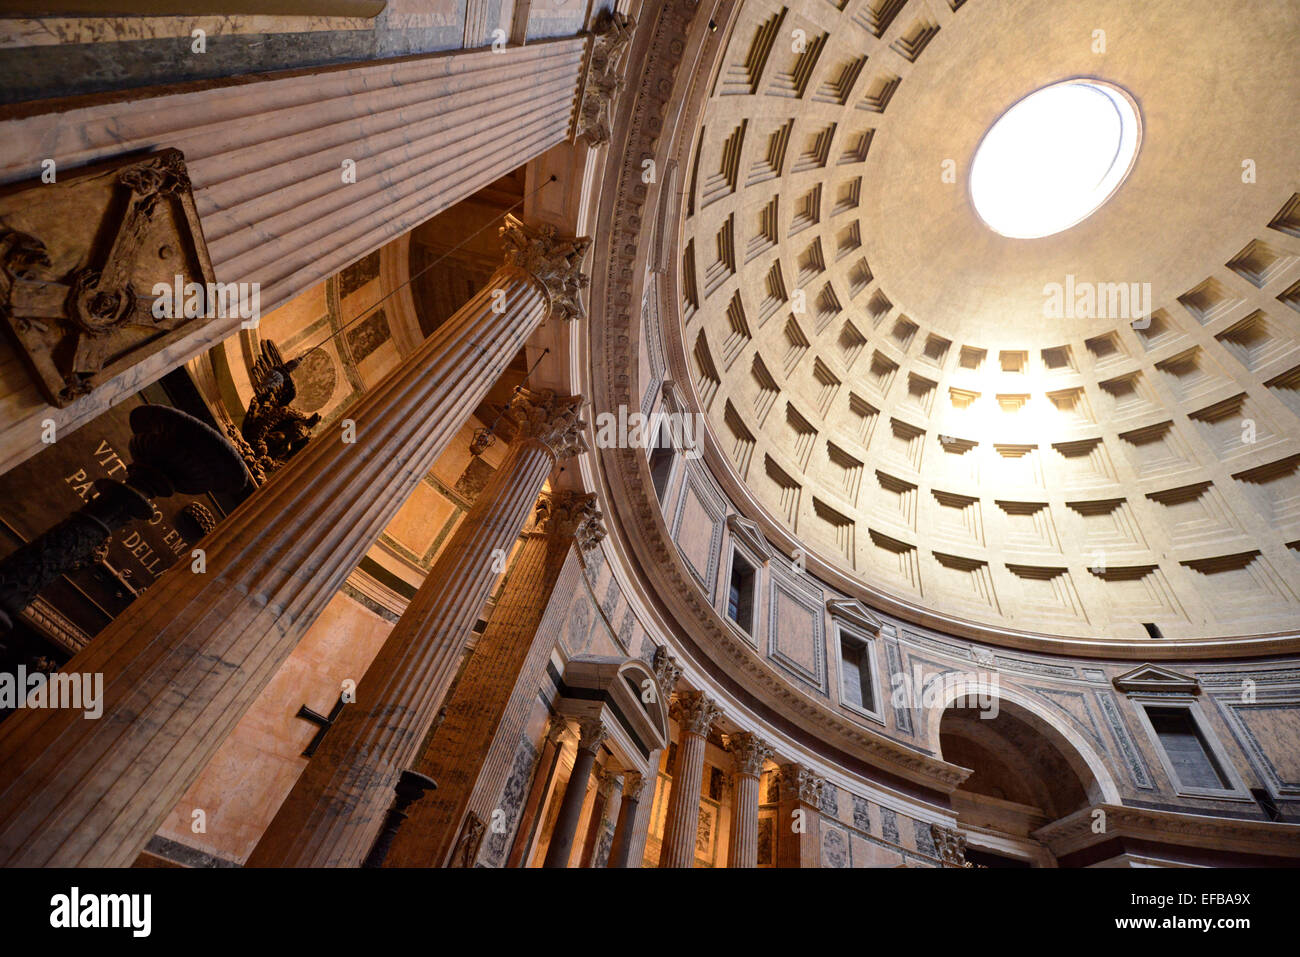 Inside the Pantheon Rome Italy Stock Photo